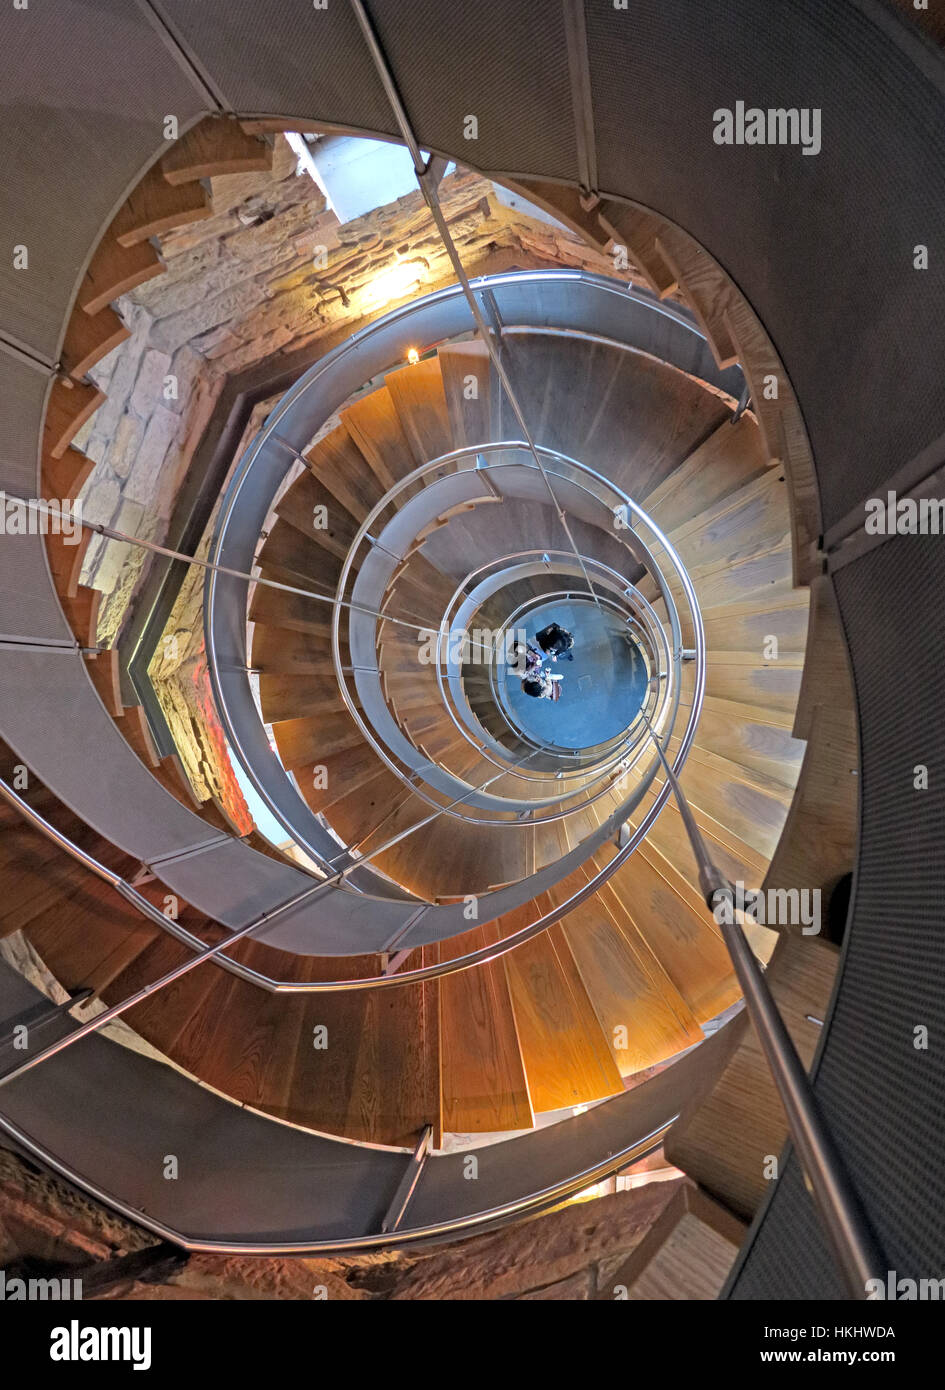 The Lighthouse Helical Staircase, 11 Mitchell LN, Glasgow, Écosse, Royaume-Uni, G1 3NU Banque D'Images